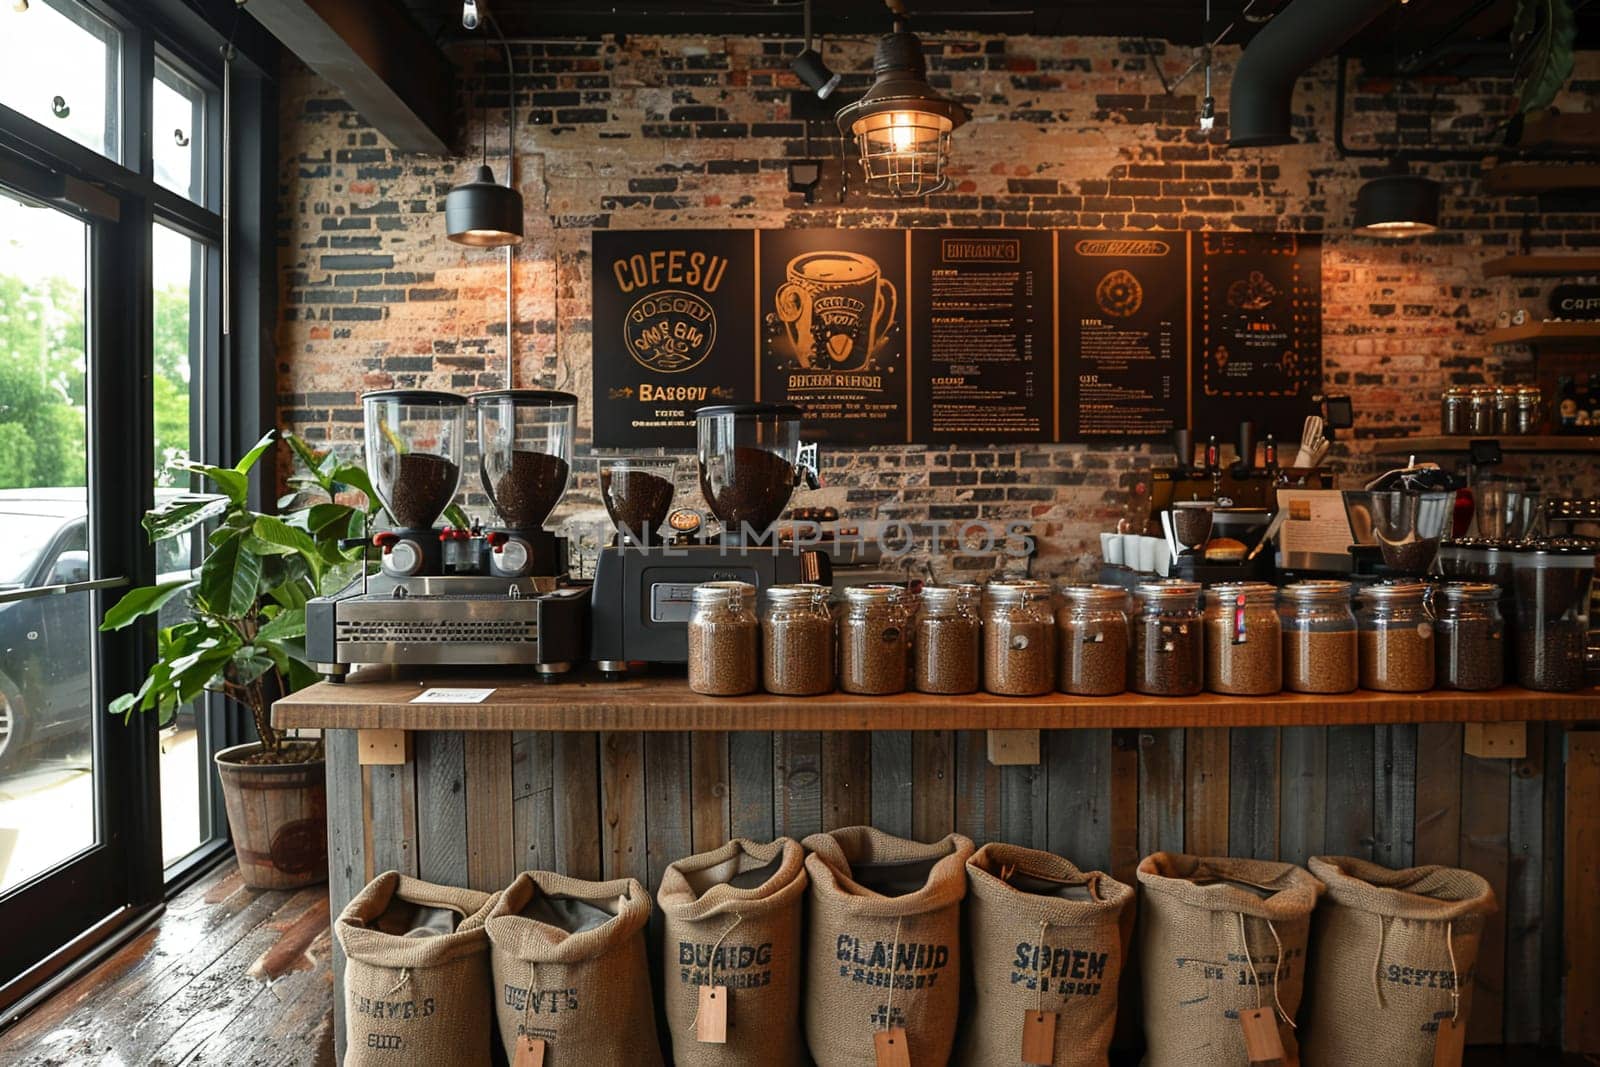 Artisan coffee roaster with exposed brick and burlap coffee bags